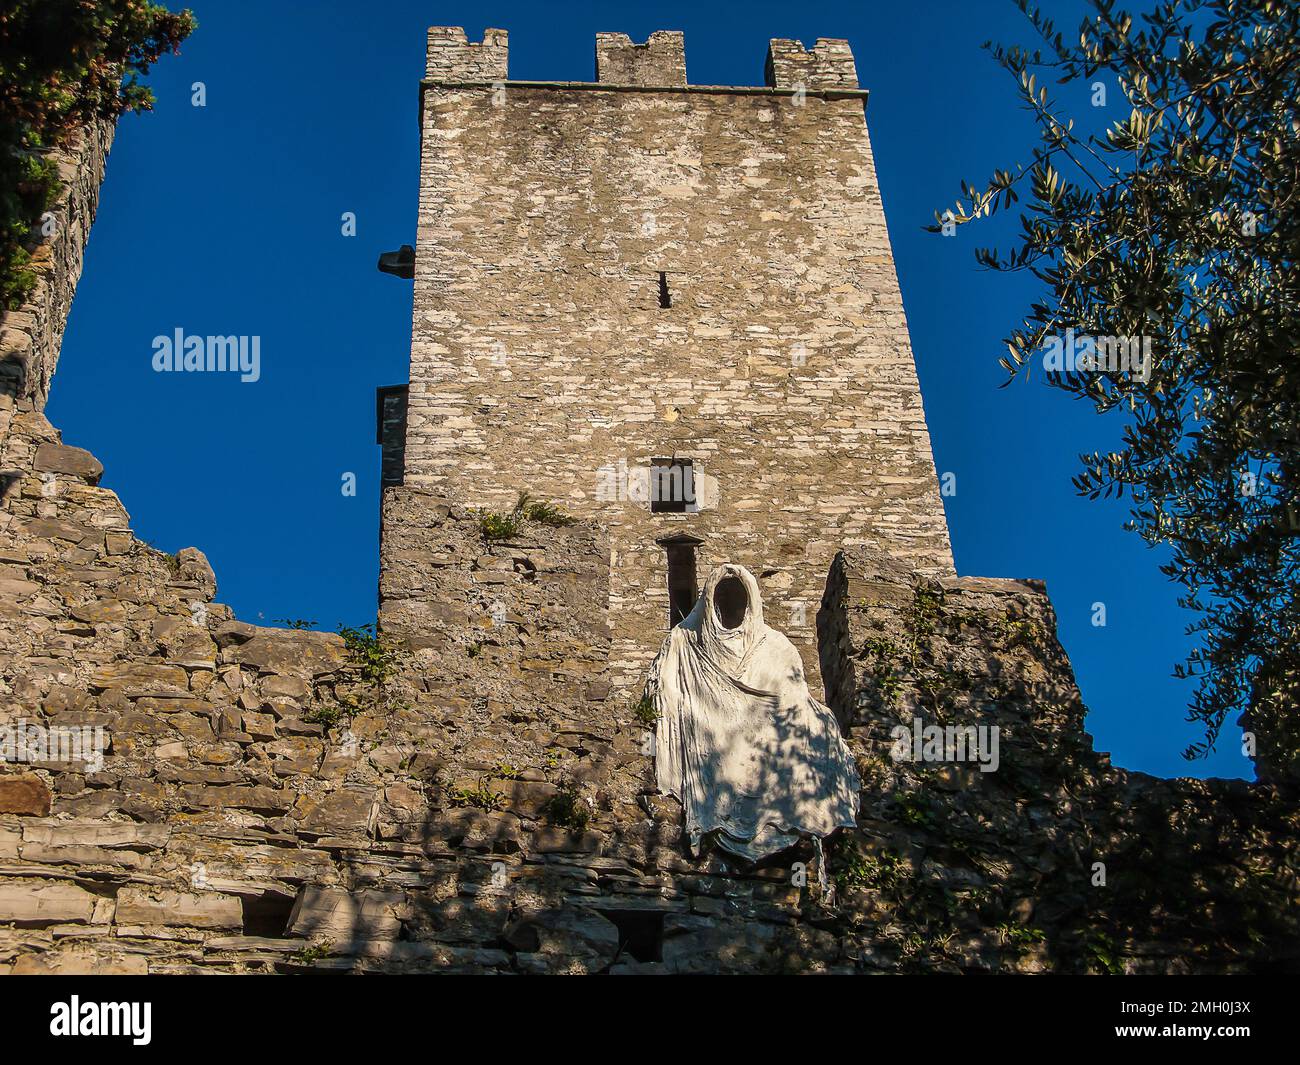 the tower and ghosts of Castello di Vezio, Varenna, Como lake, Lombardy, Italy Stock Photo